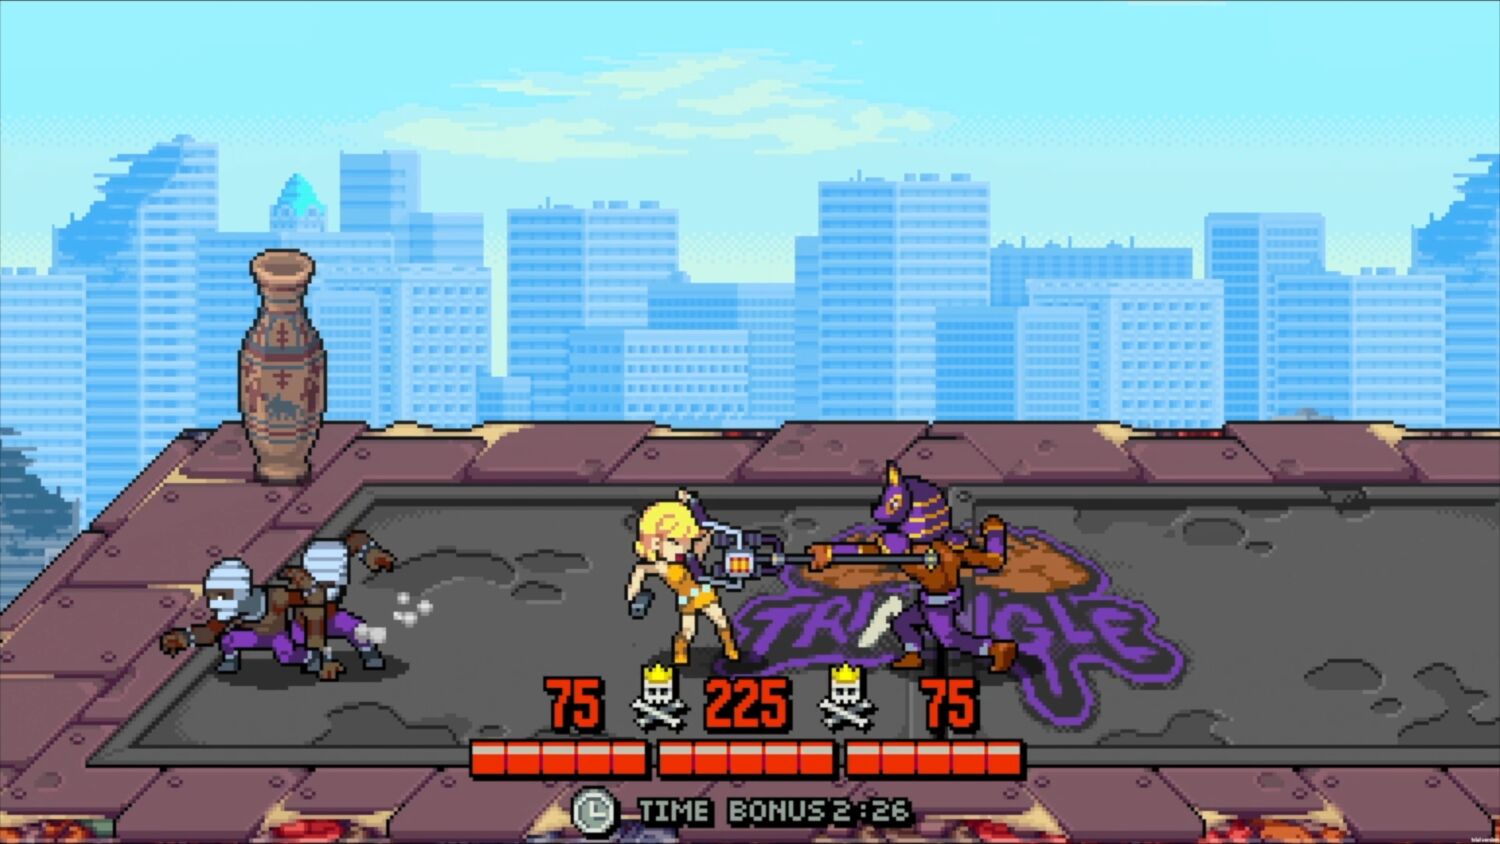 Double Dragon Gaiden: Rise of the Dragons – 10 Minutes of Gameplay